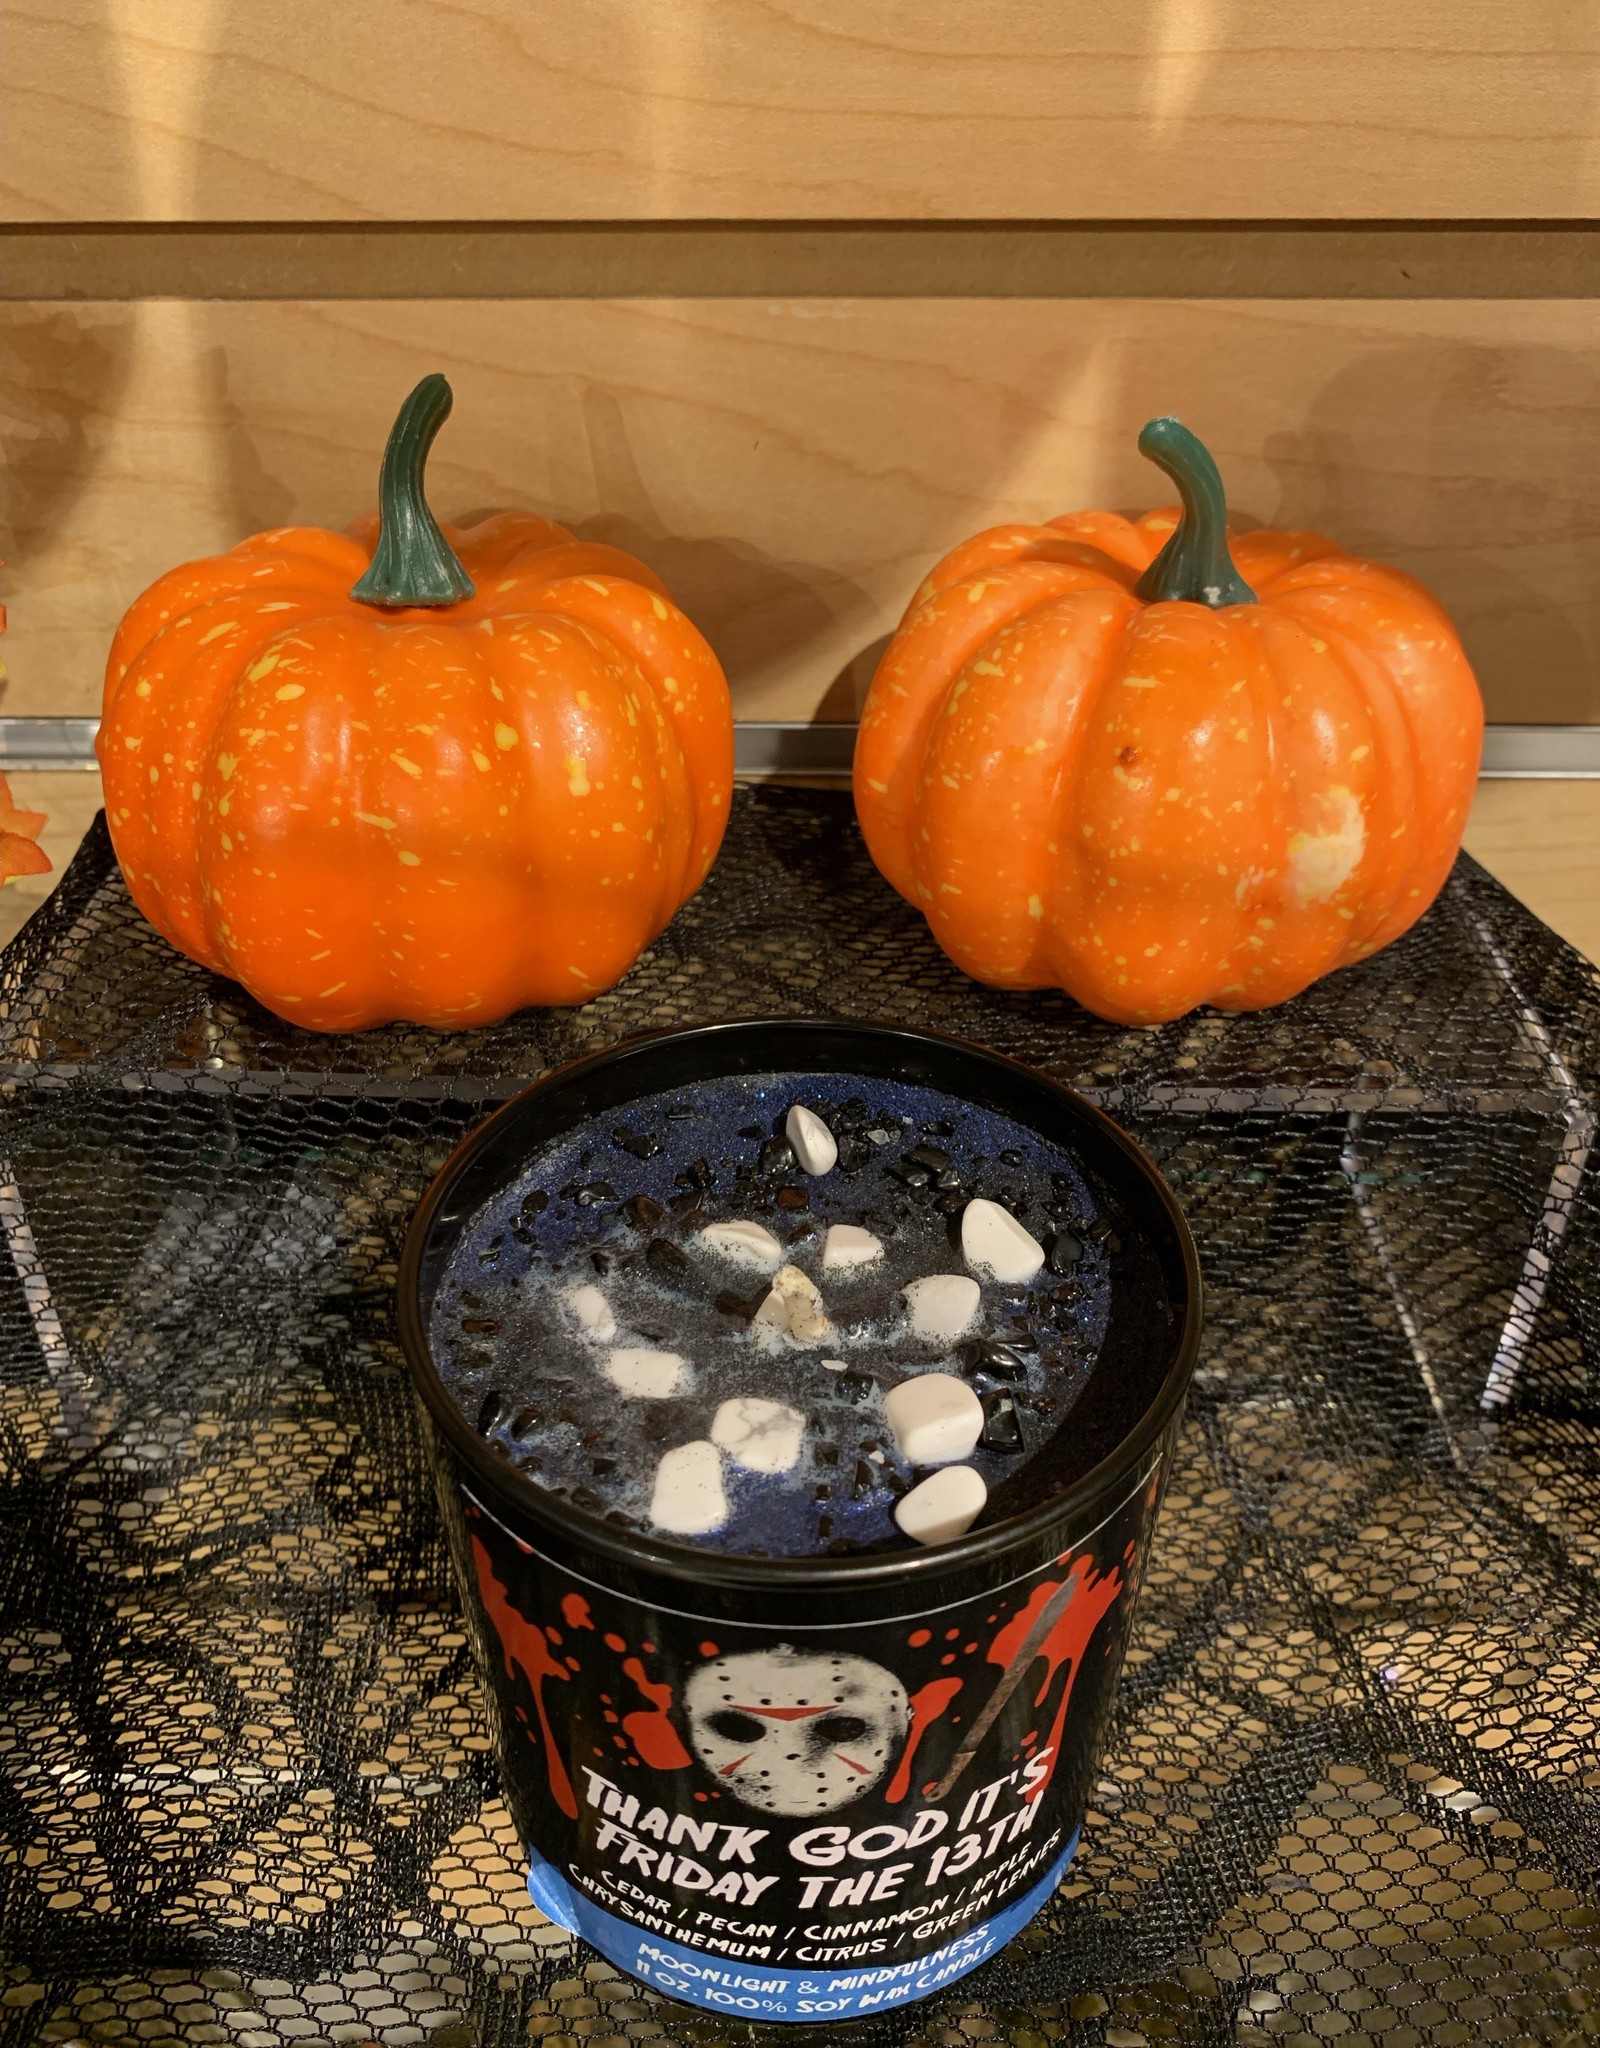 Moonlight and Mindfulness Thank God It's Friday The 13th Candle 11oz (seasonal)